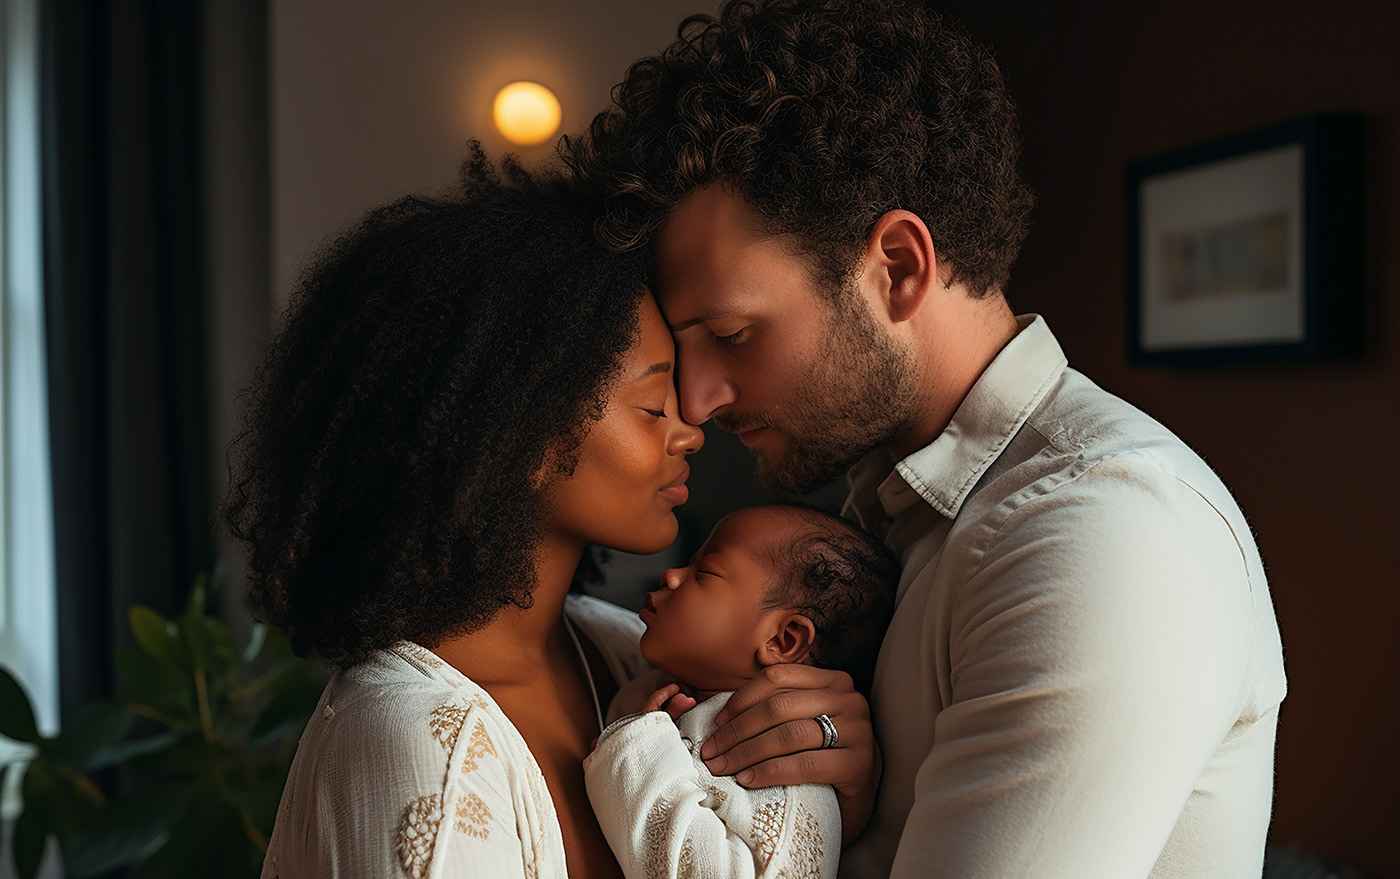 multiracial family mother newborn father Love child happy together son